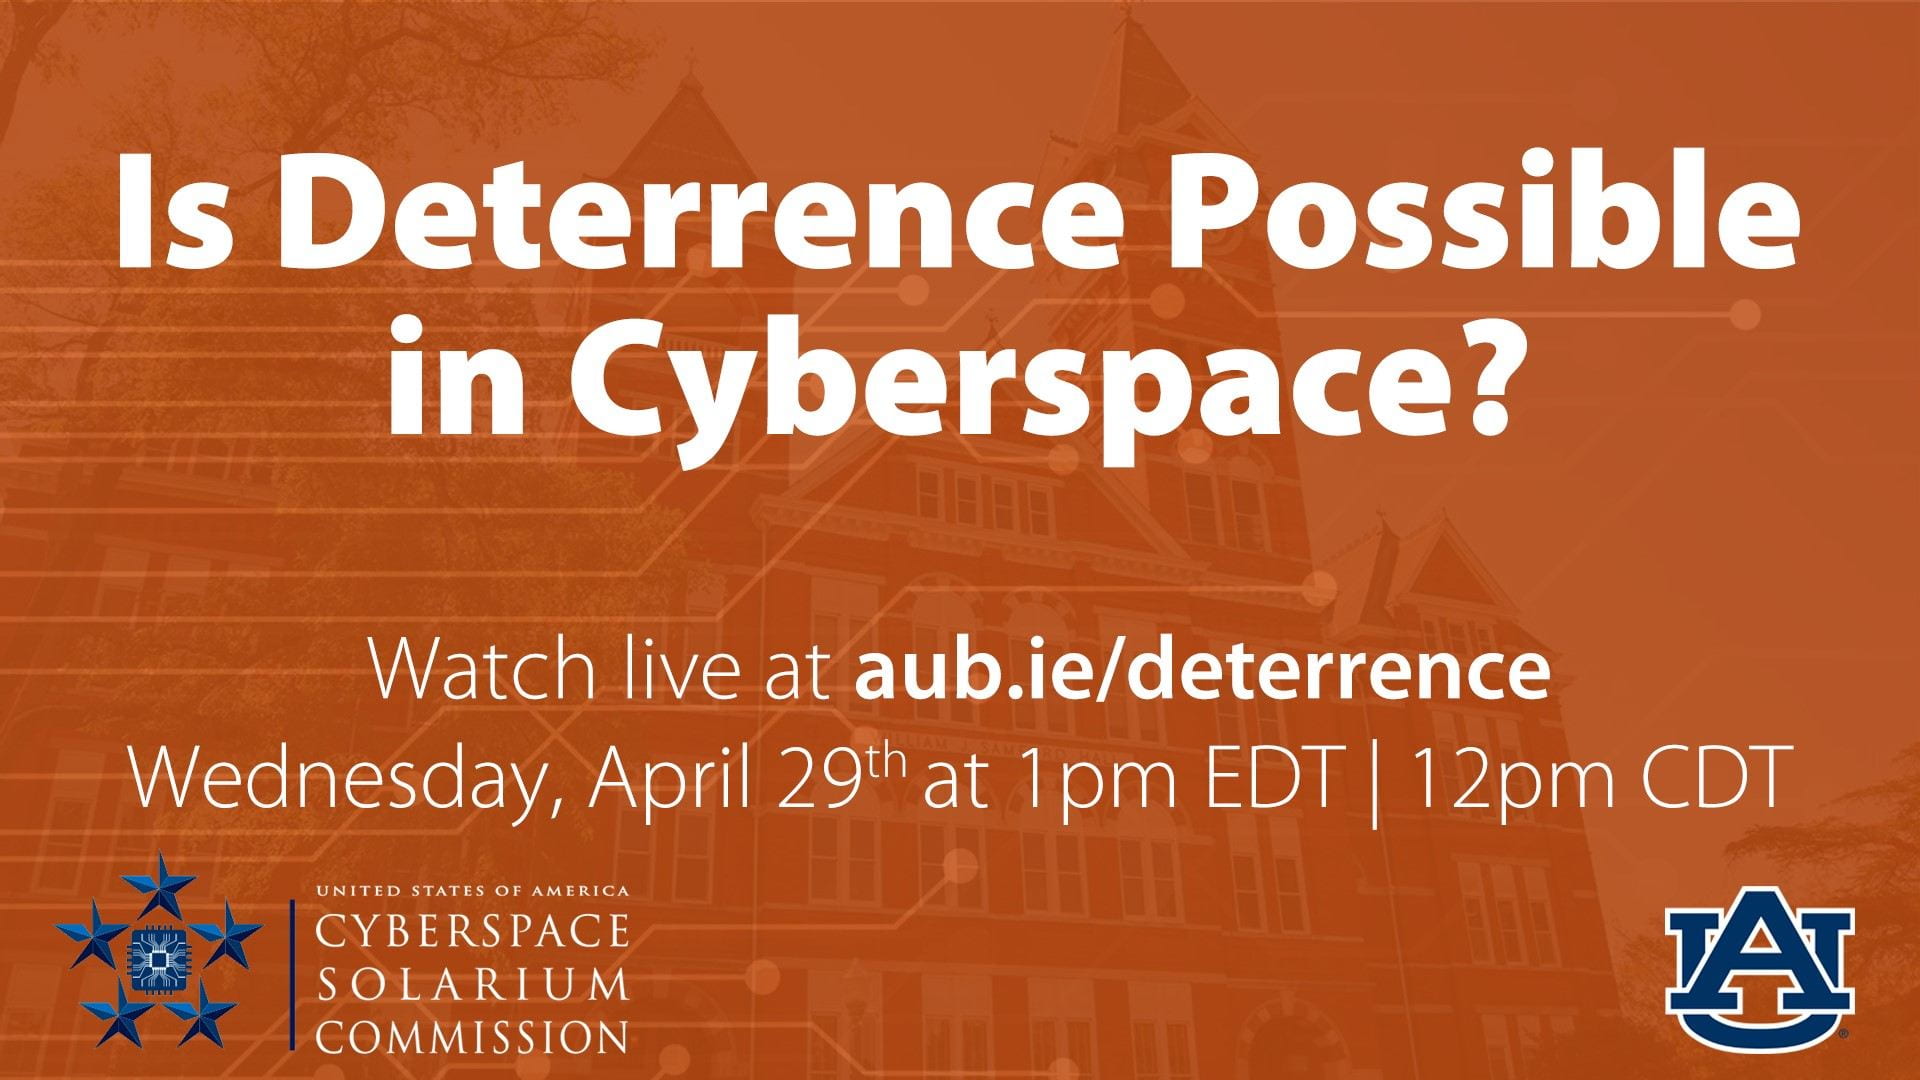 Is Deterrence Possible in Cyberspace?